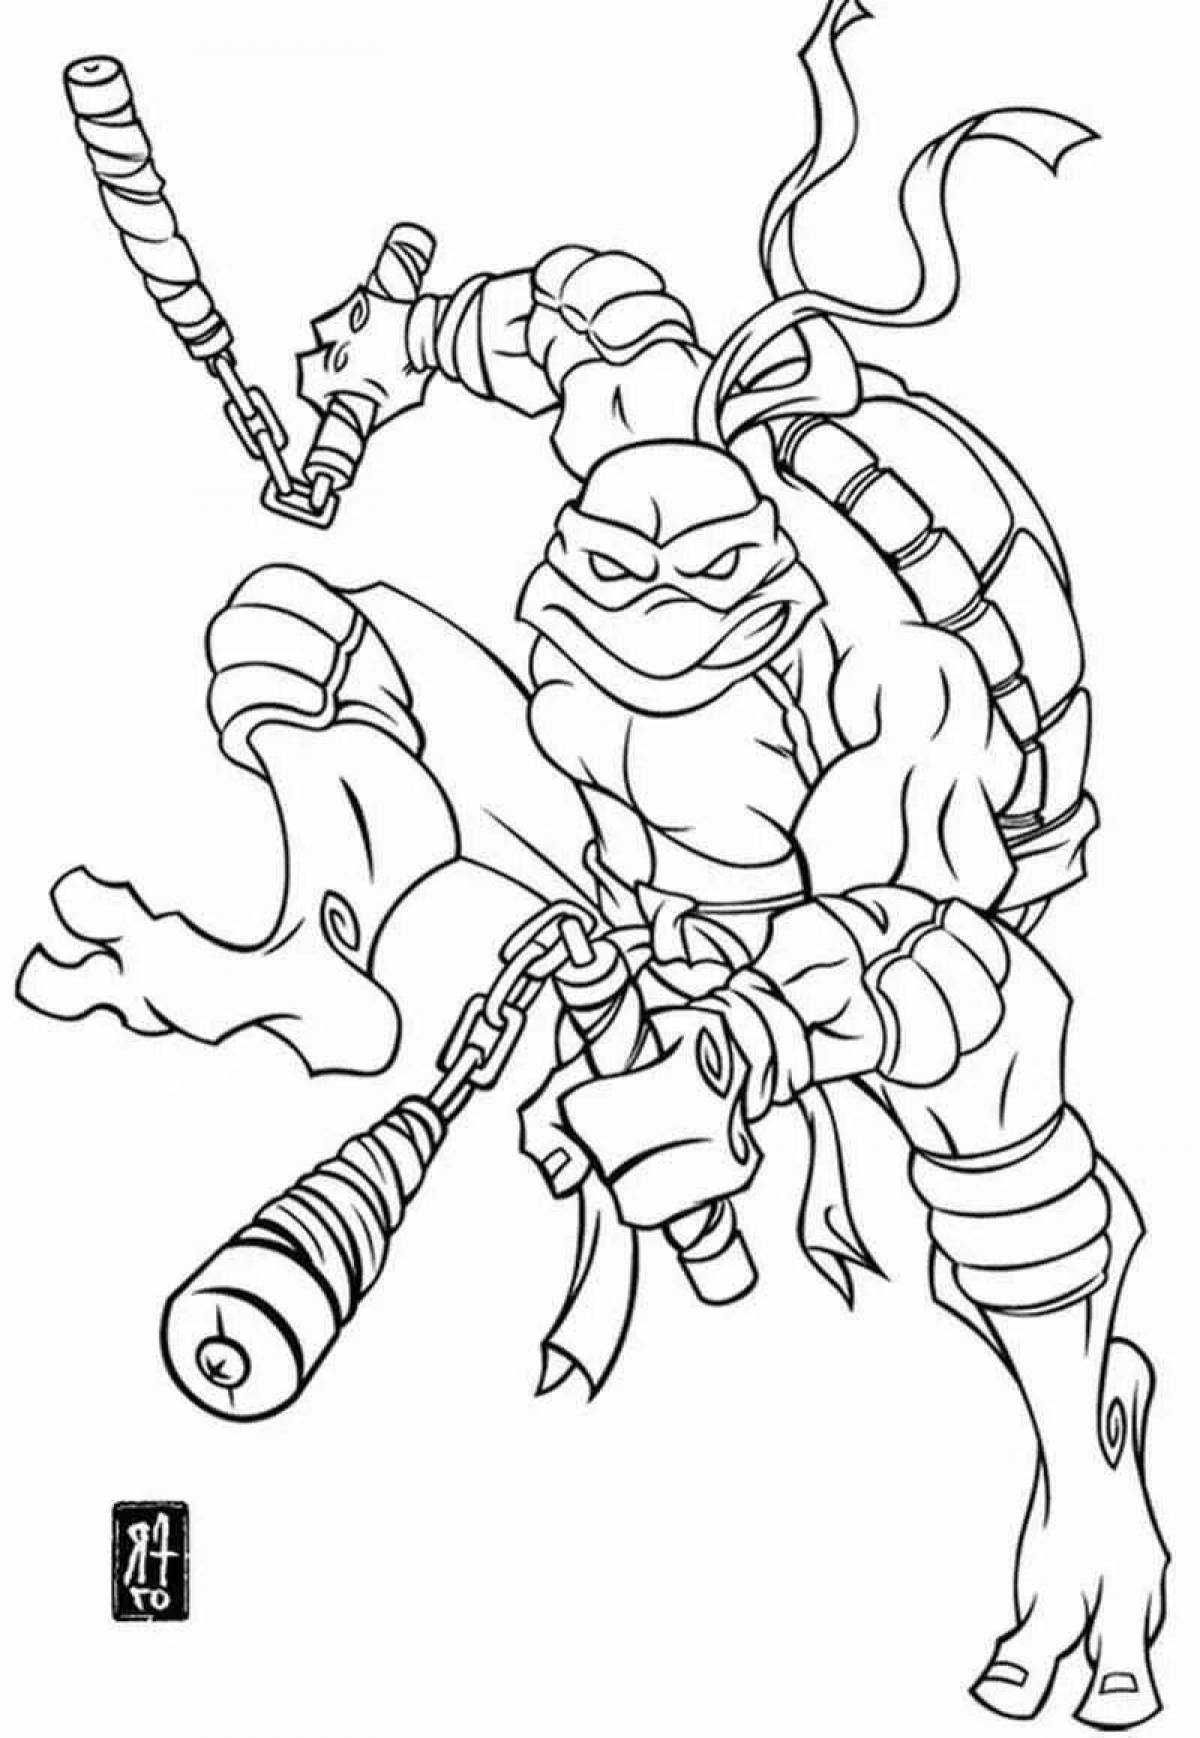 Color-lively mutant coloring page